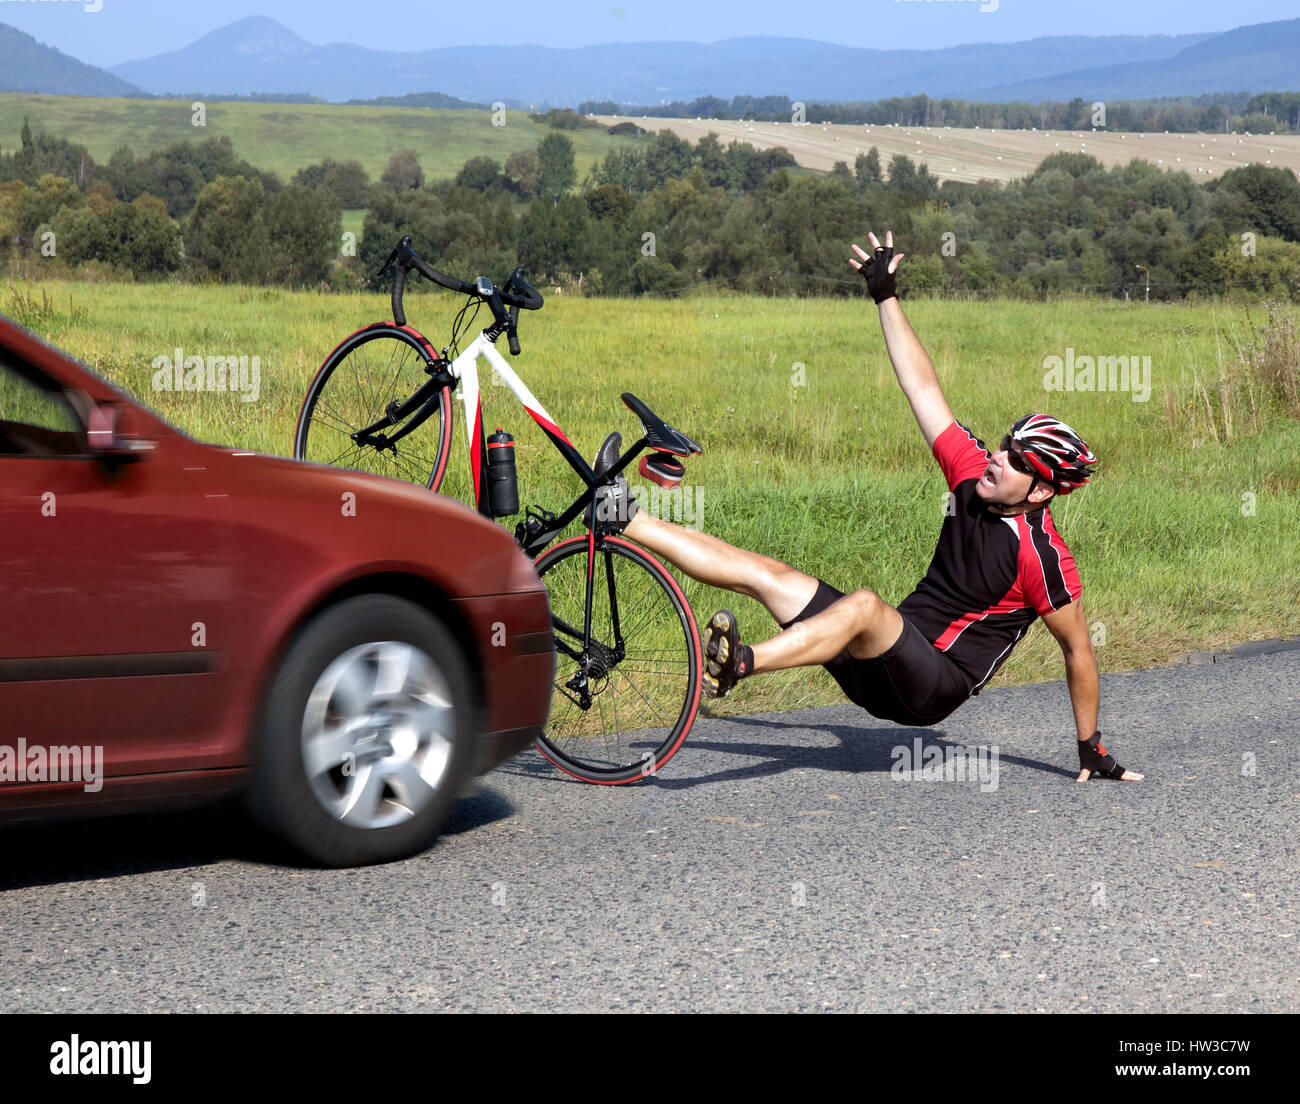 Accident cars with biker. Car collides cyclist on the road. Dangerous traffic on asphalt way on the countryside. Road crash misfortune car with a cycl Stock Photo